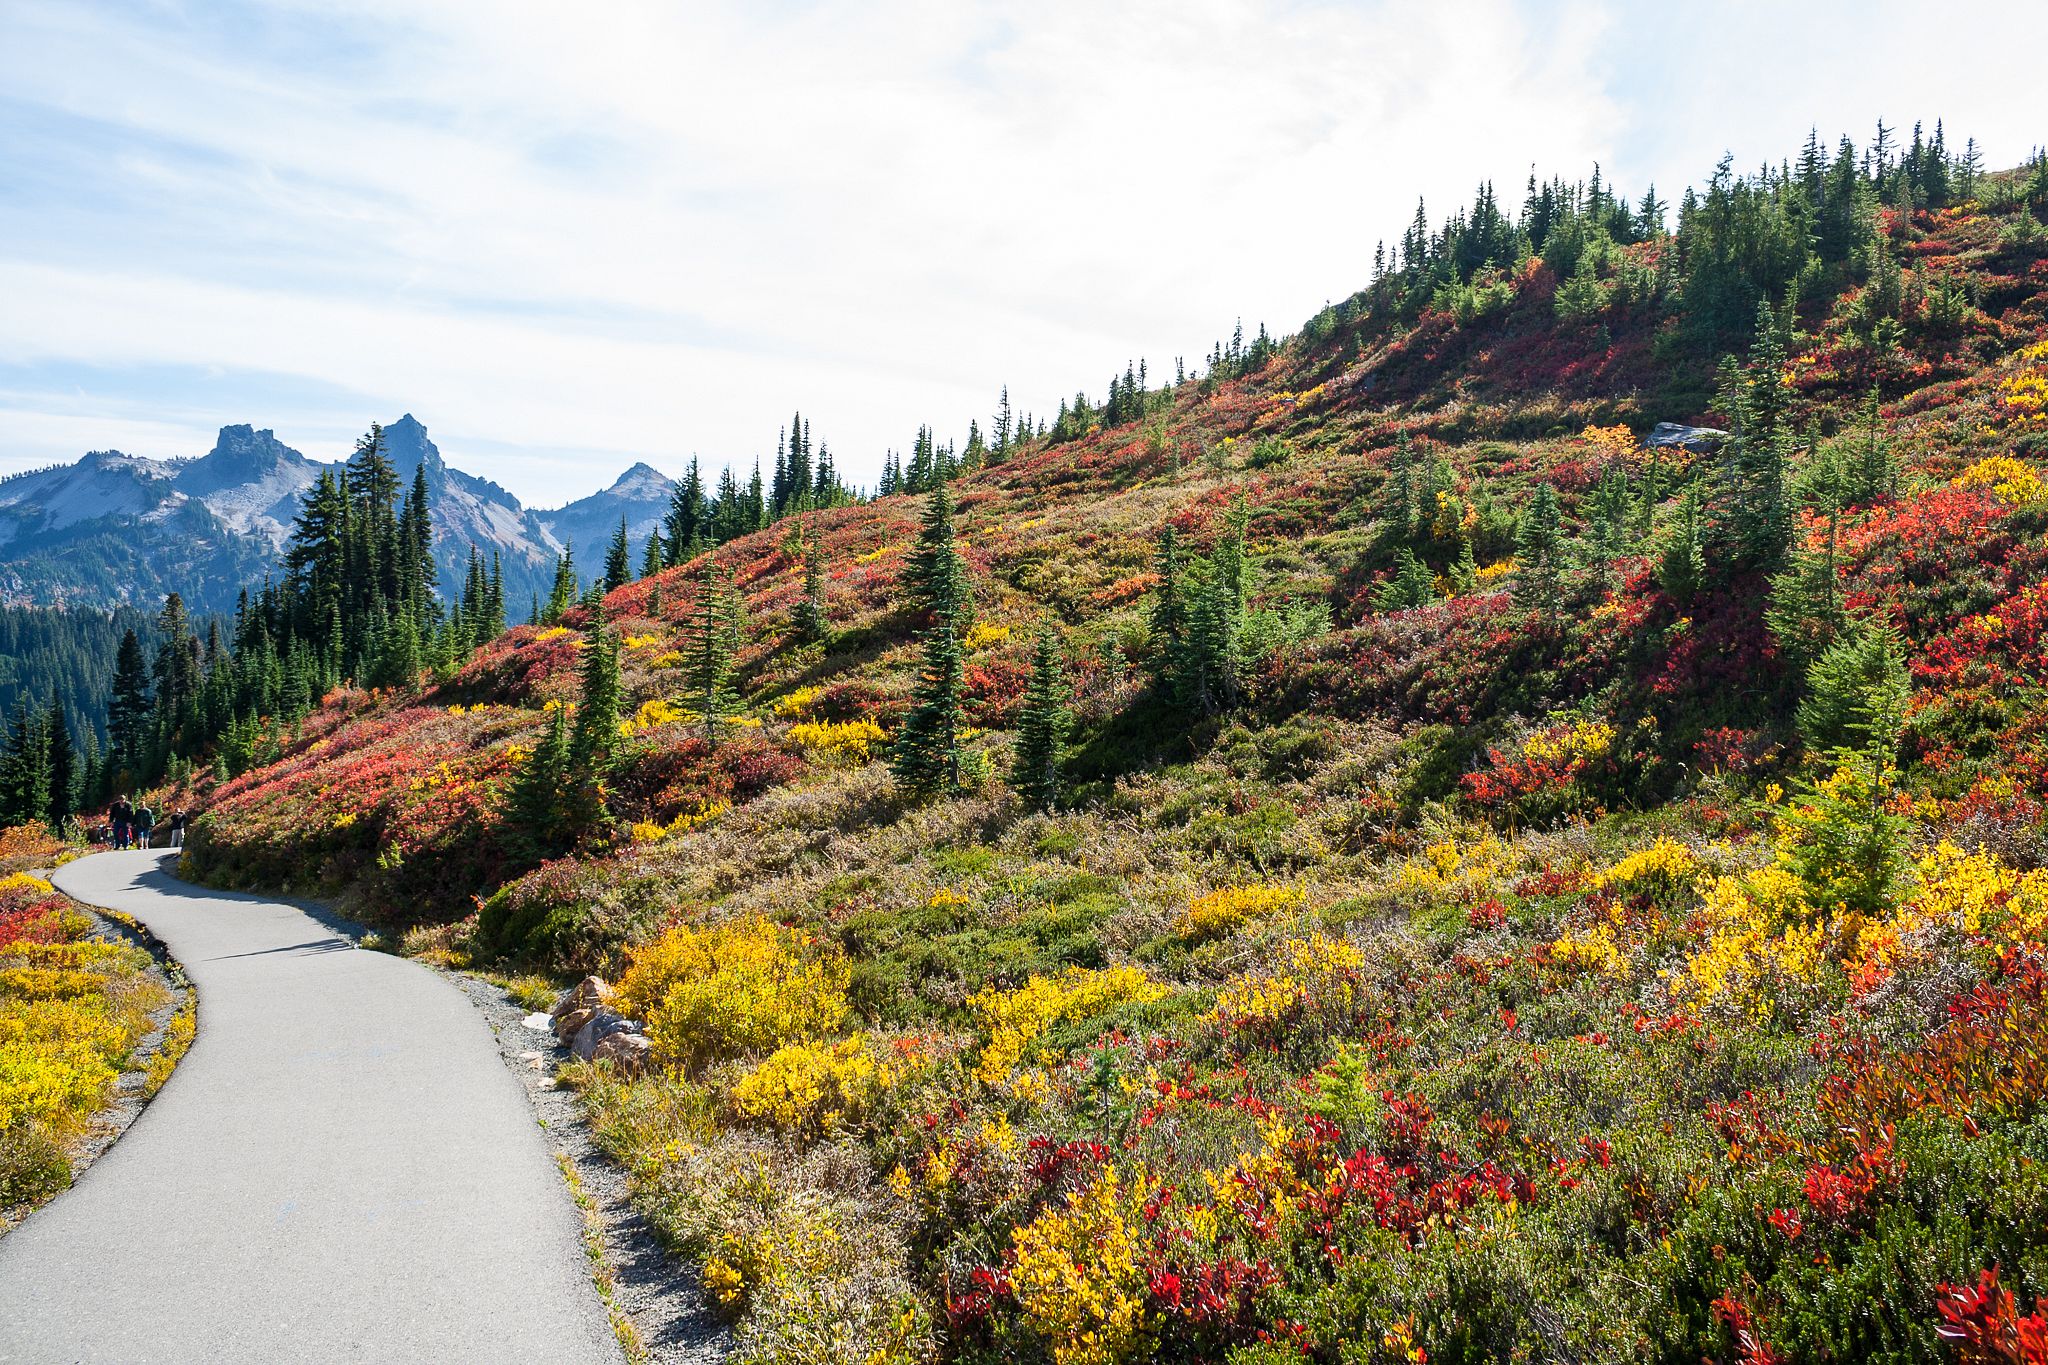 Colorful sub-alpine wilflowers along paved Skyline Path with mountains in the distance